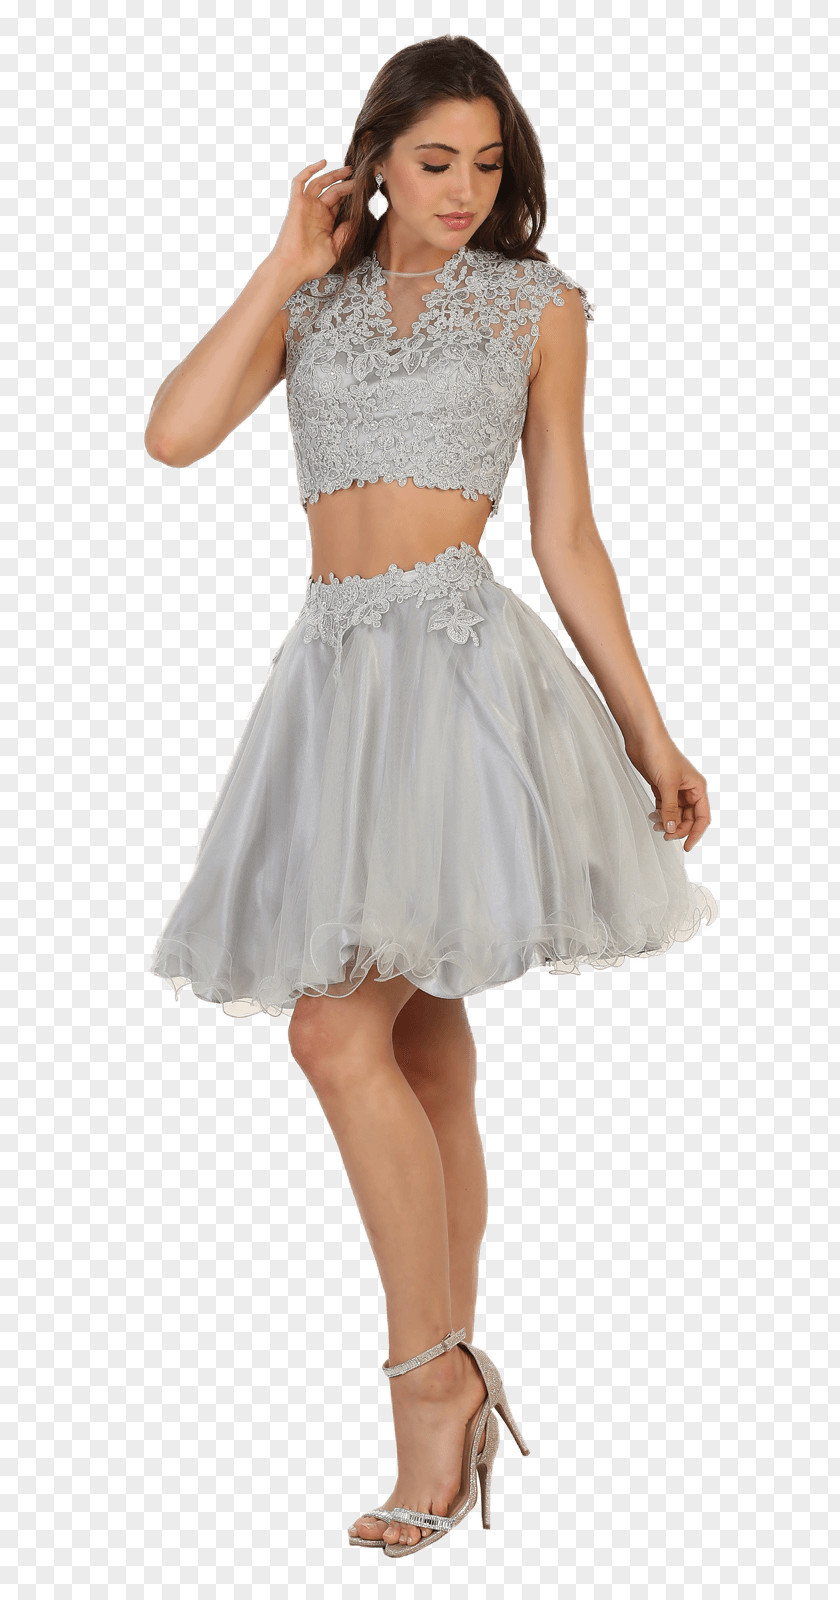 Dress Cocktail Sleeve Formal Wear Prom PNG